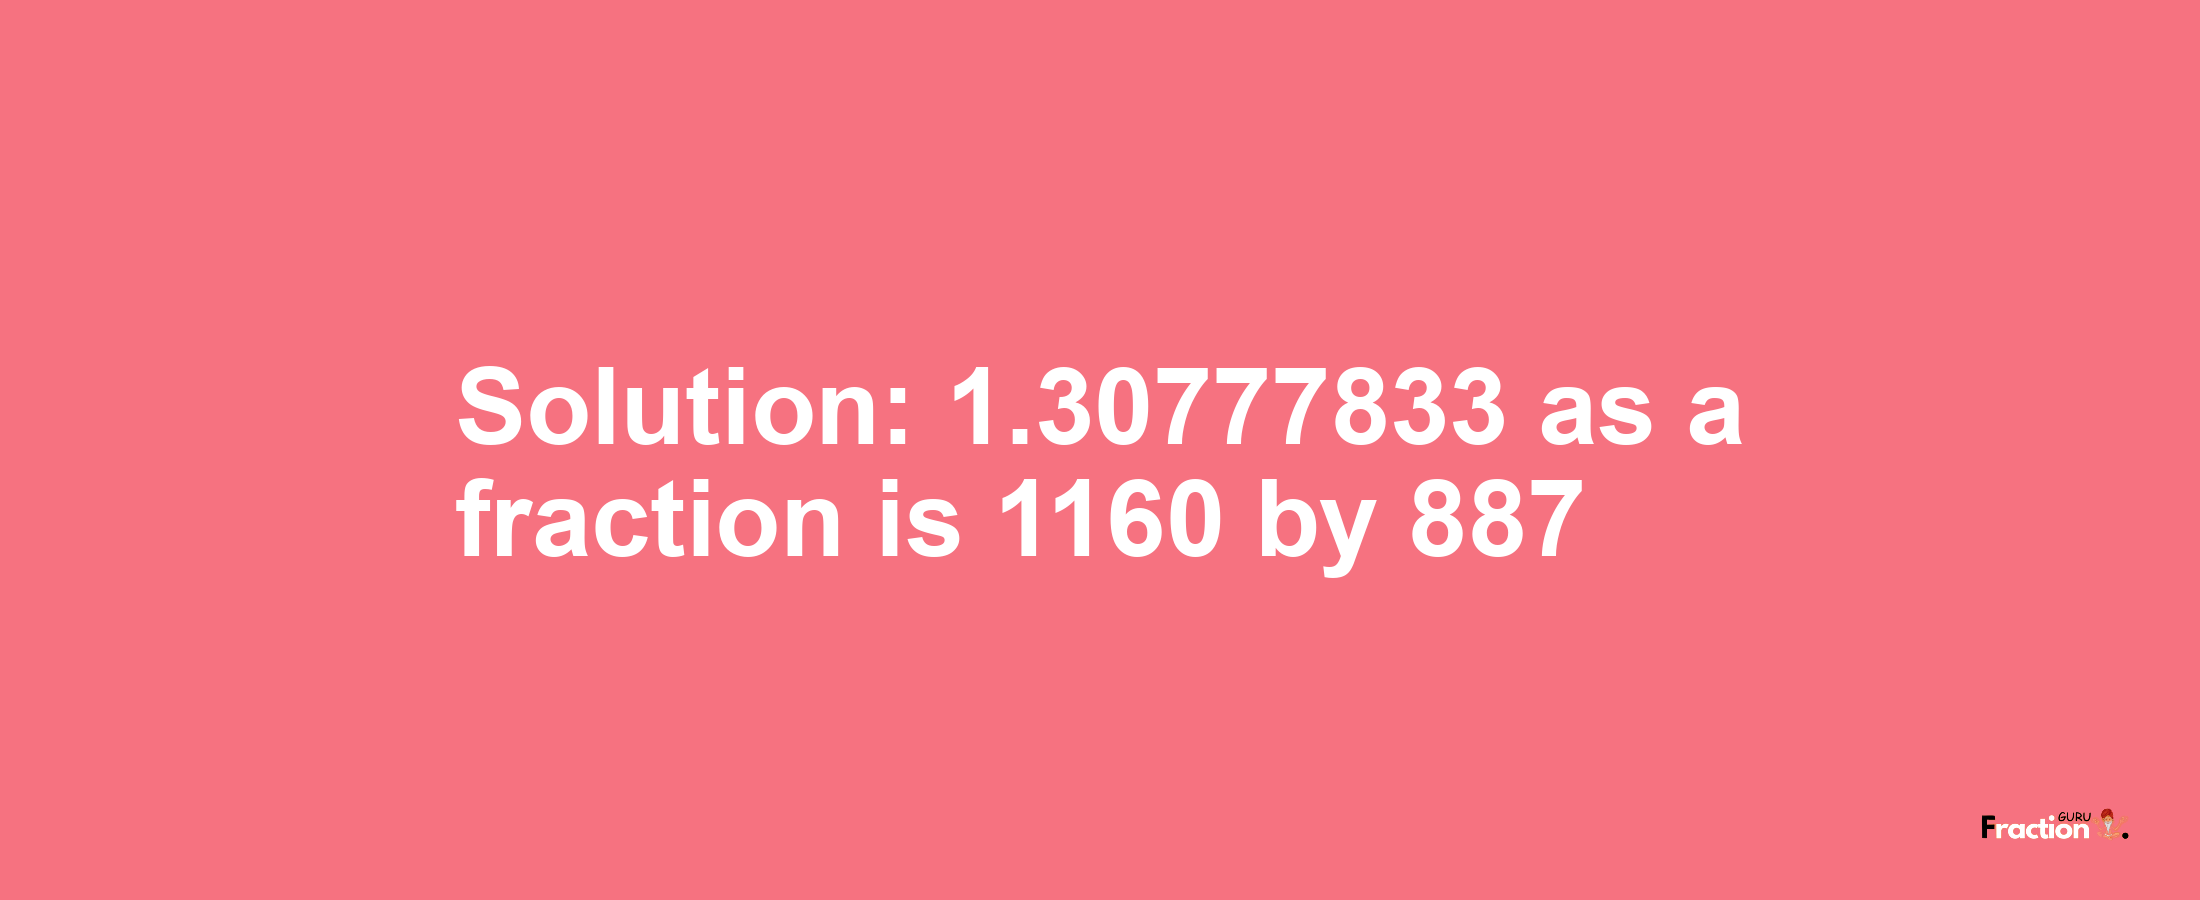 Solution:1.30777833 as a fraction is 1160/887